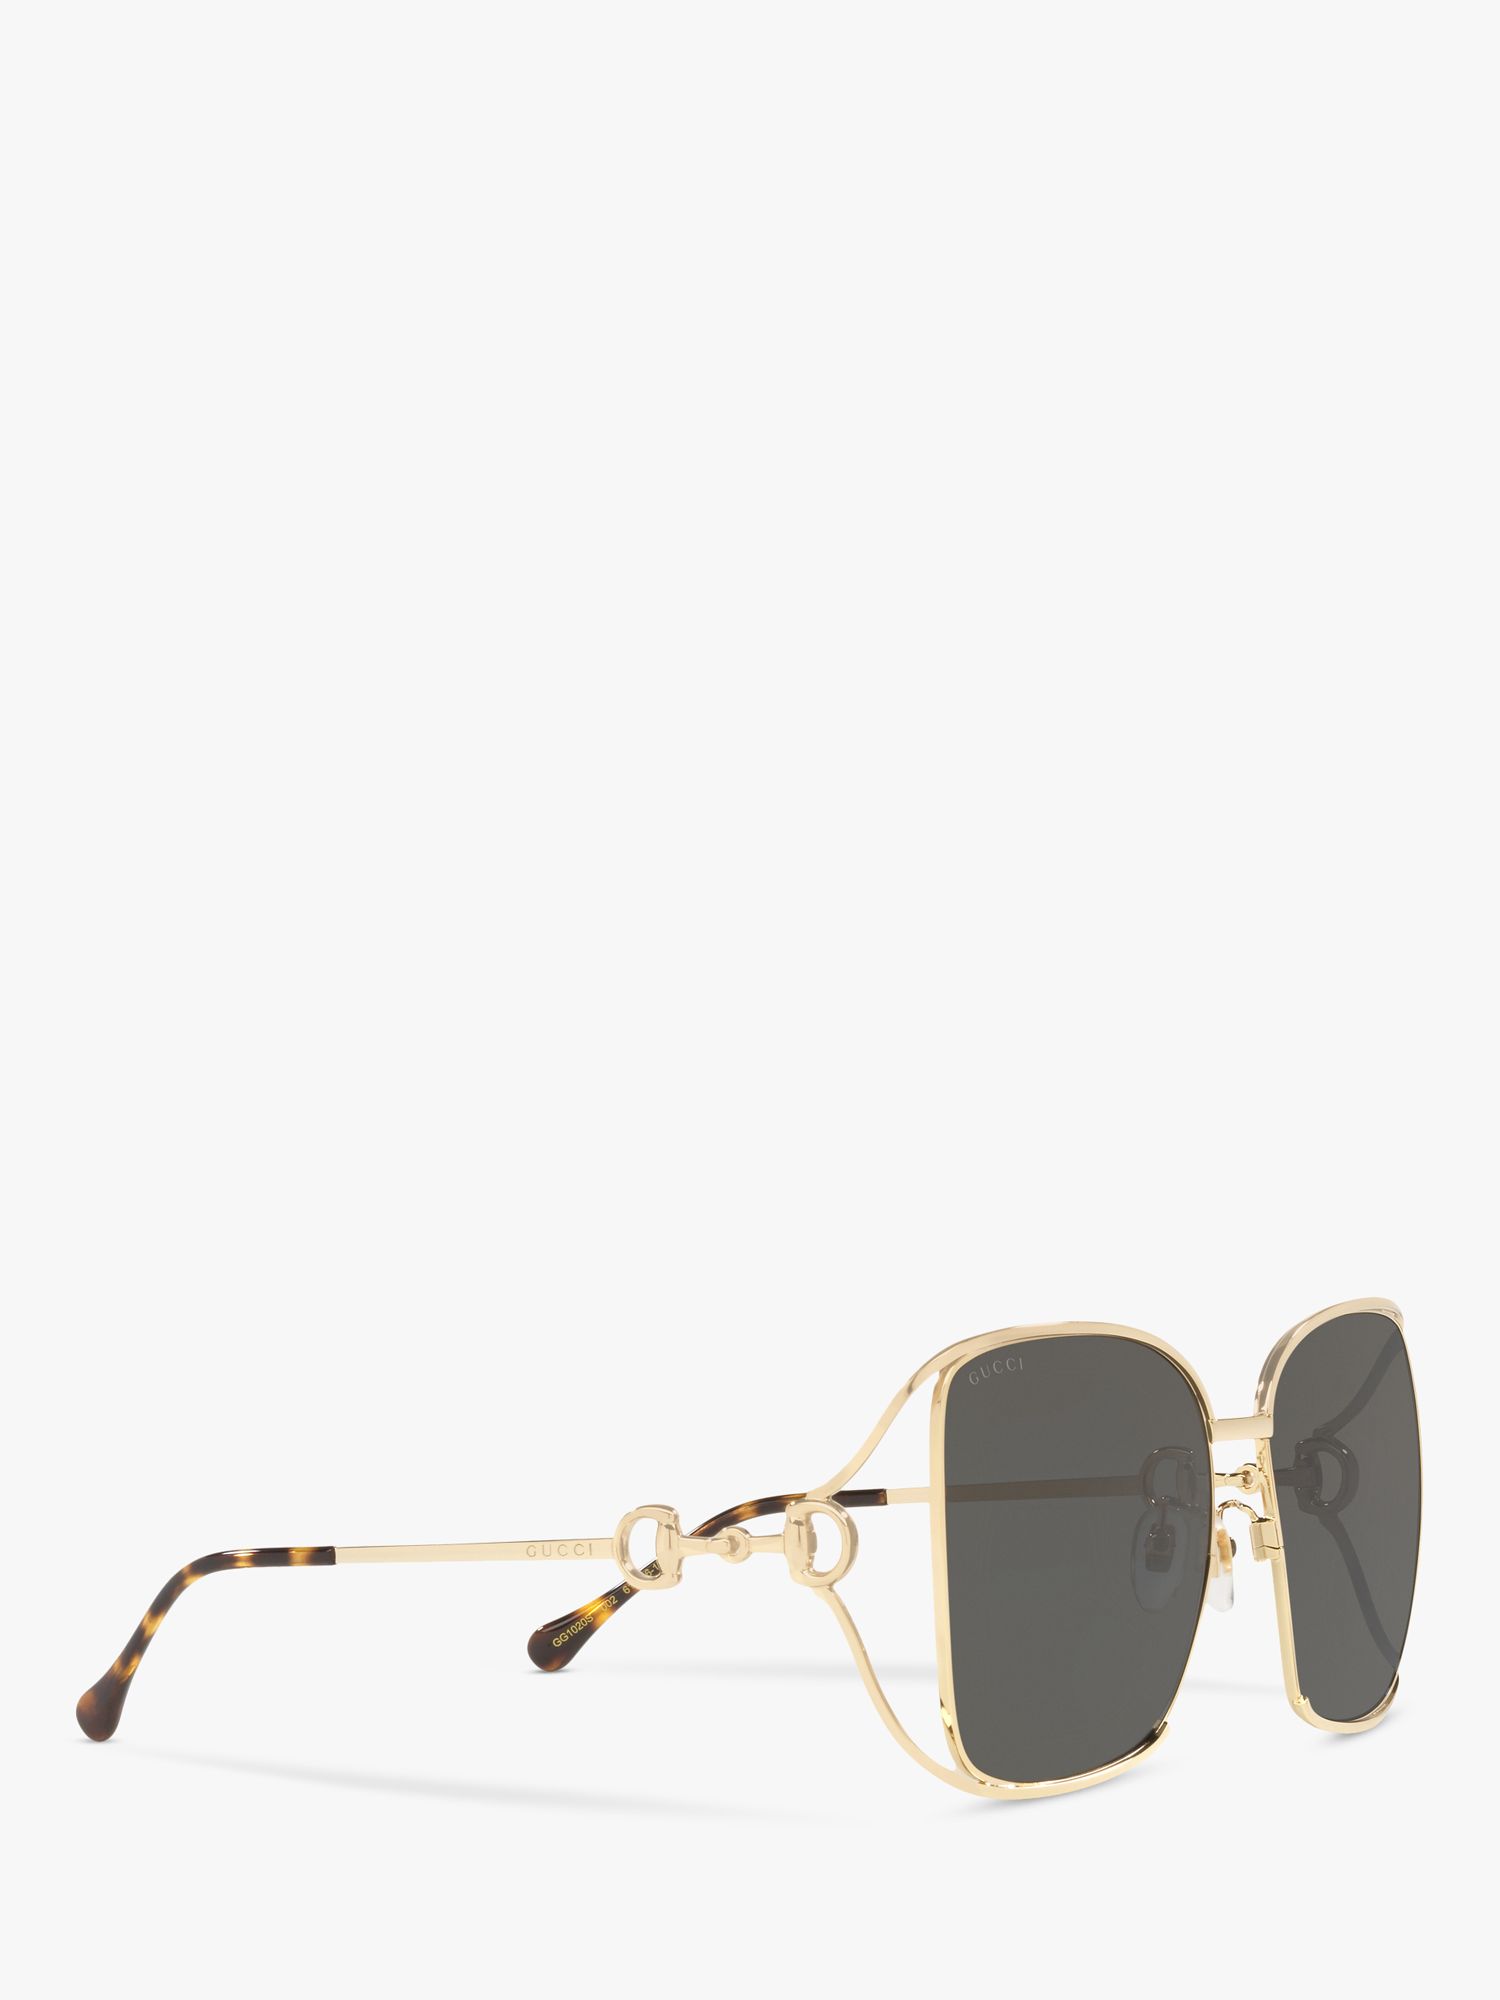 Gucci GG1020S Women's Square Sunglasses, Gold/Grey at John Lewis & Partners